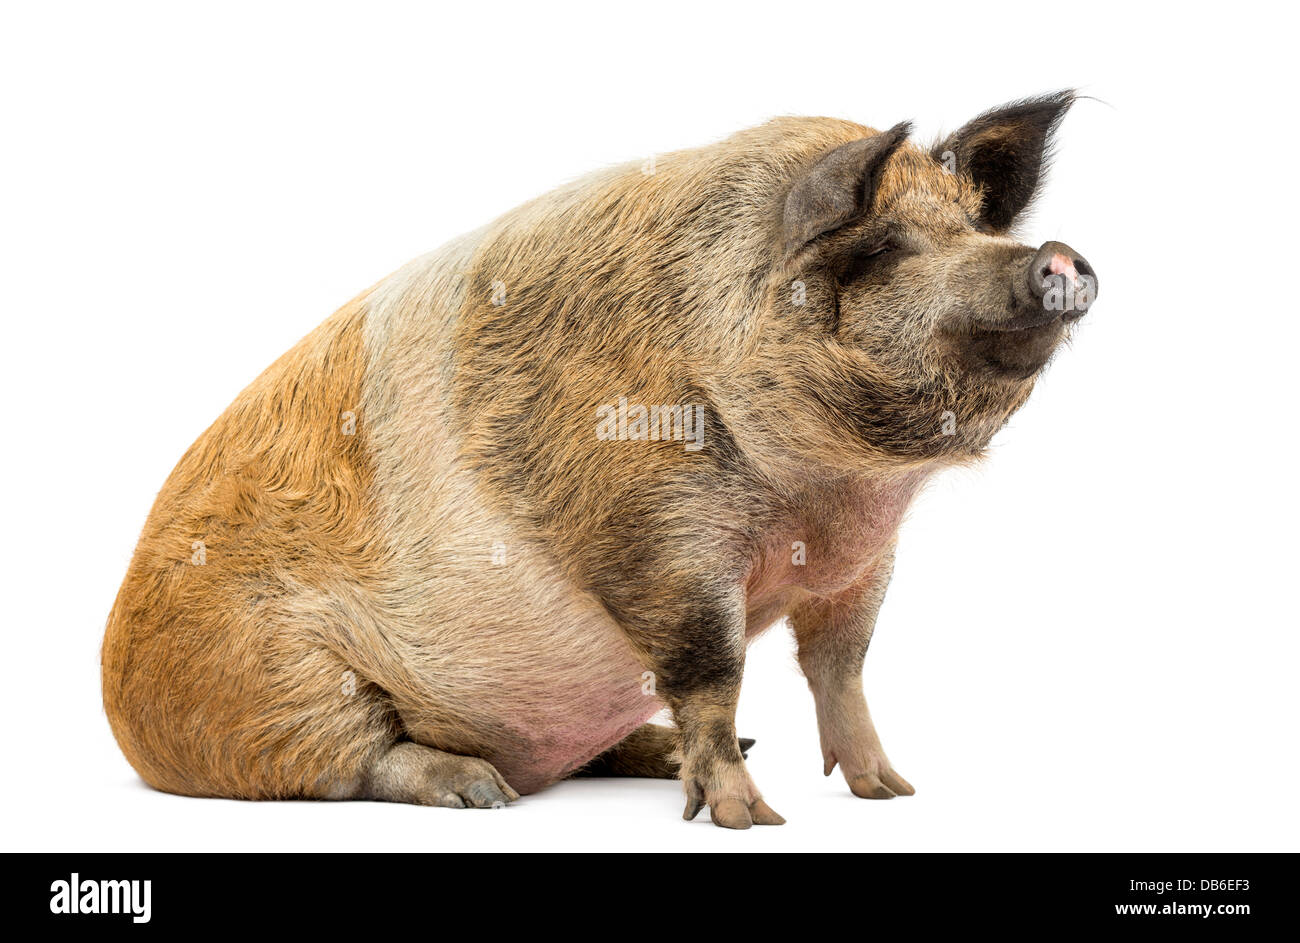 Domestic pig sitting and looking away against white background Stock Photo